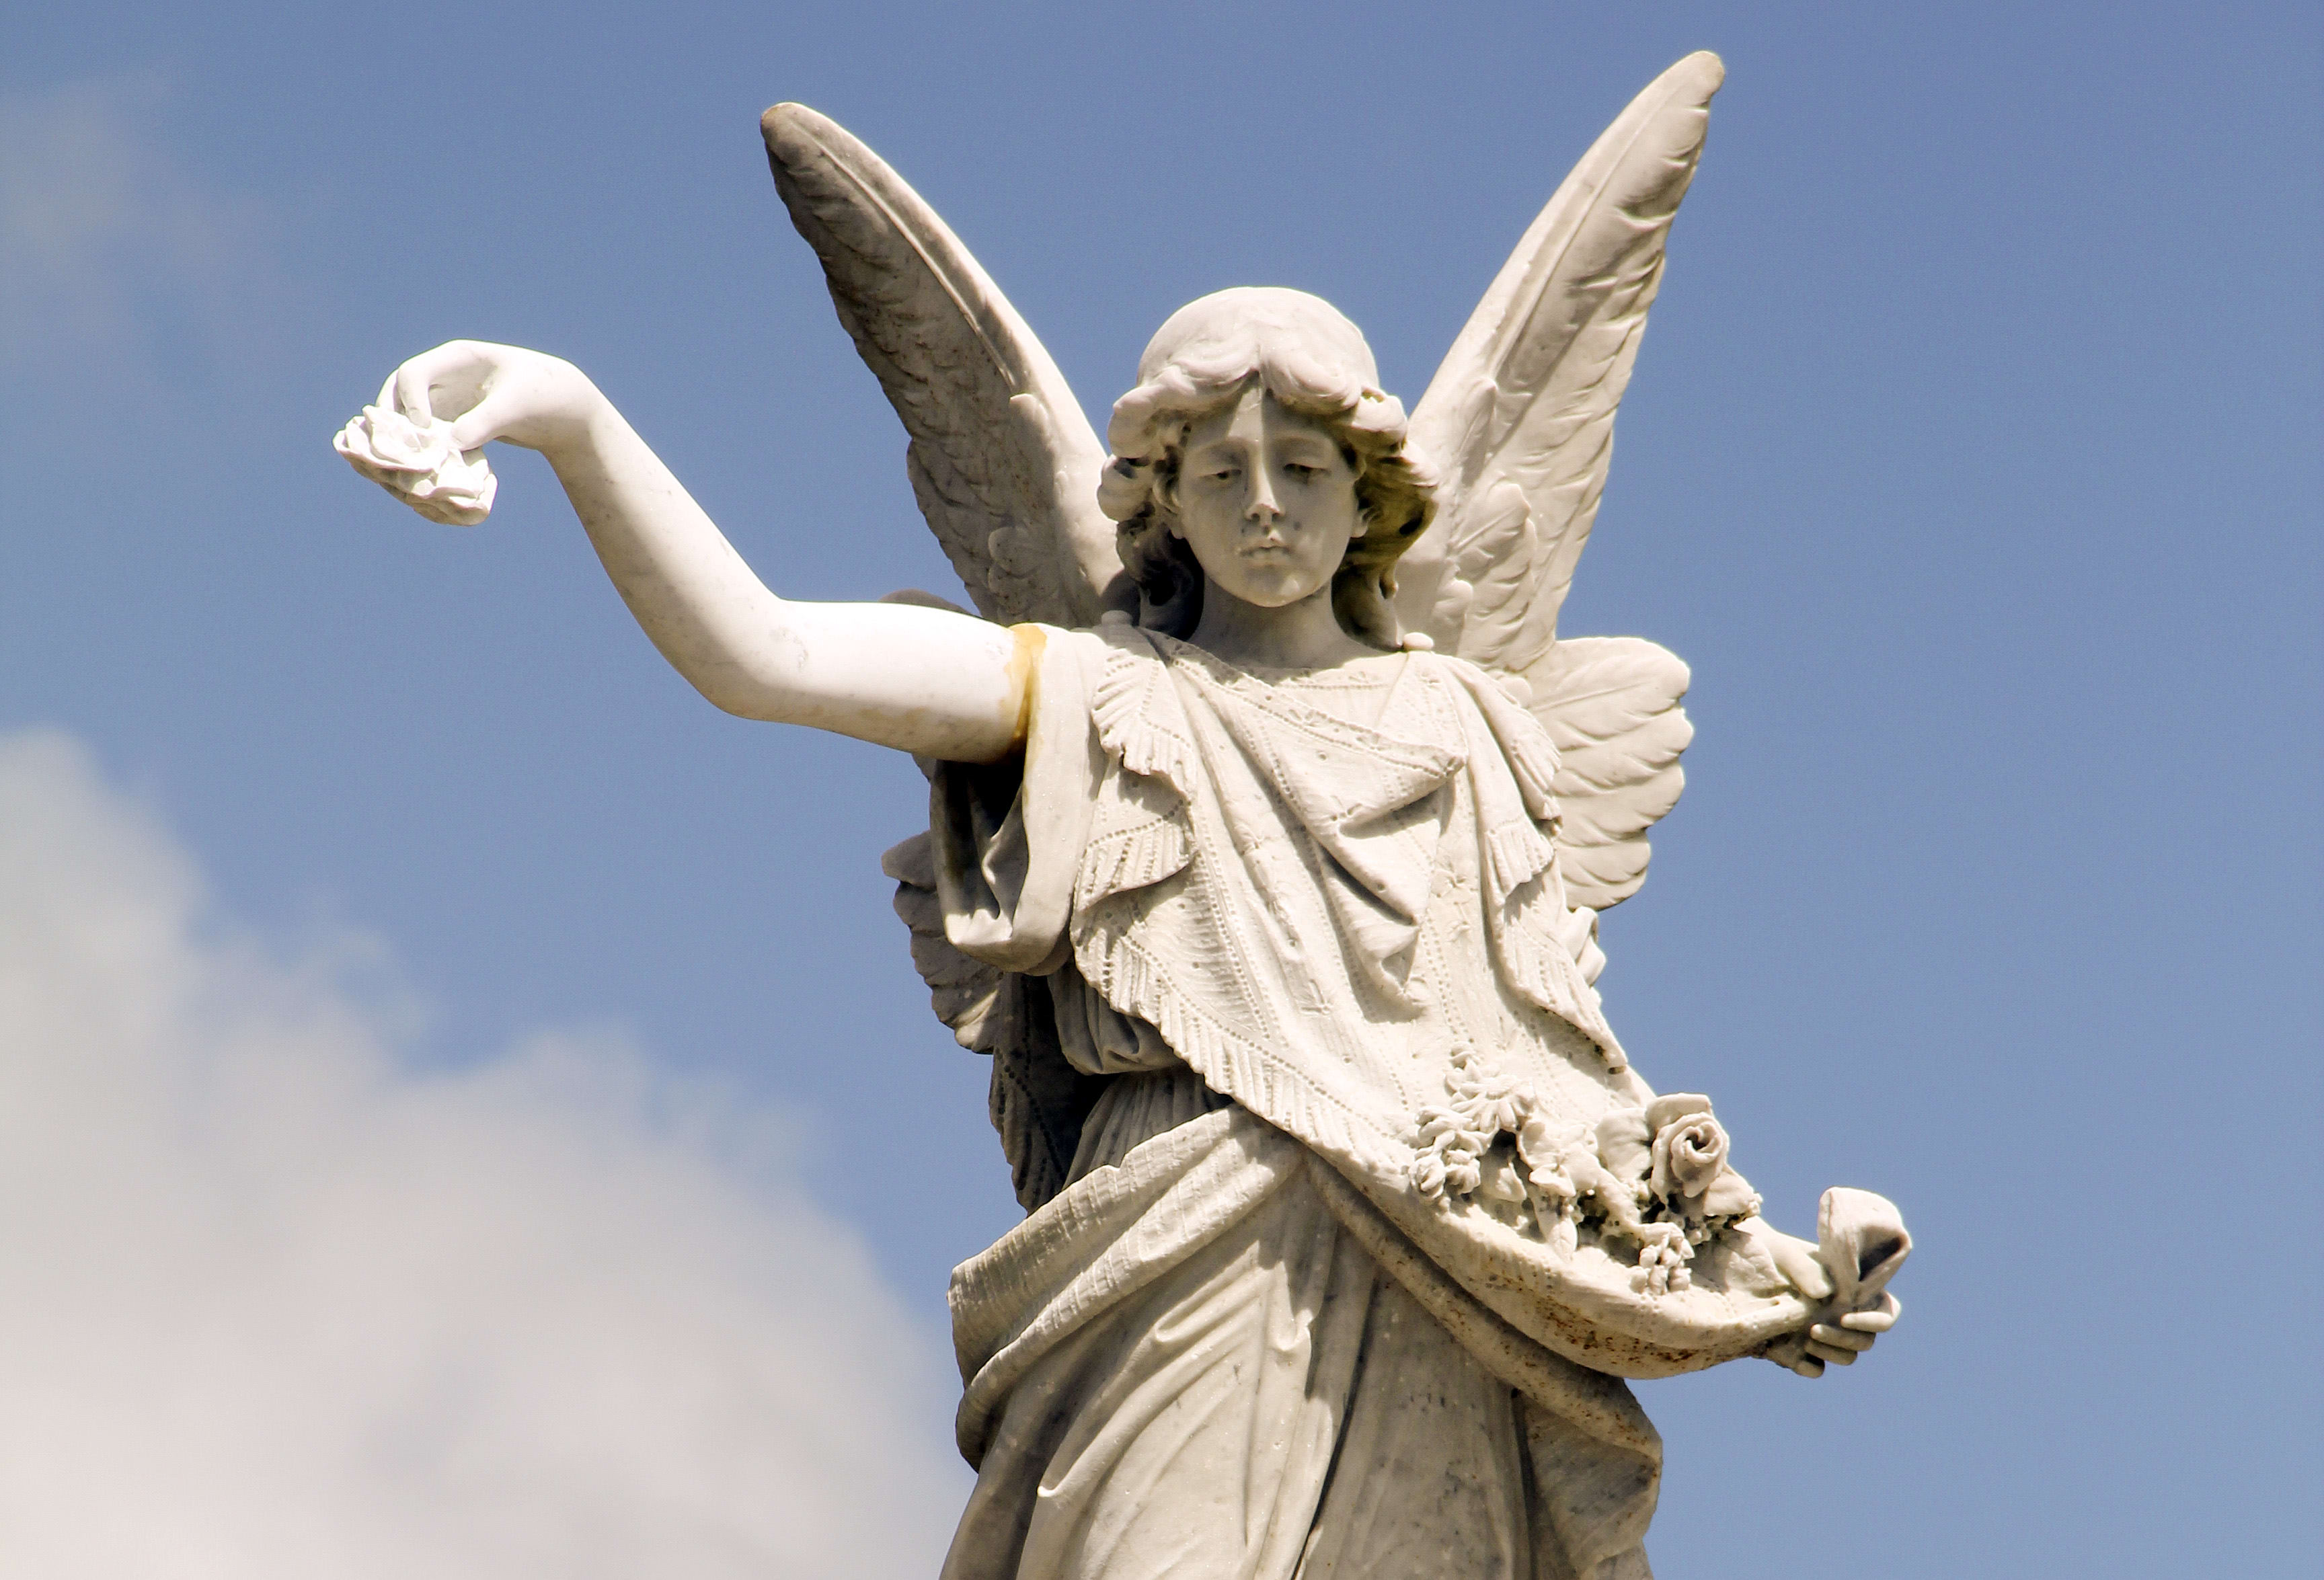 The white Italian marble statue of an angel was commissioned by a Te Rarawa chief, Leopold Busby, in 1916, two years after WWI started.